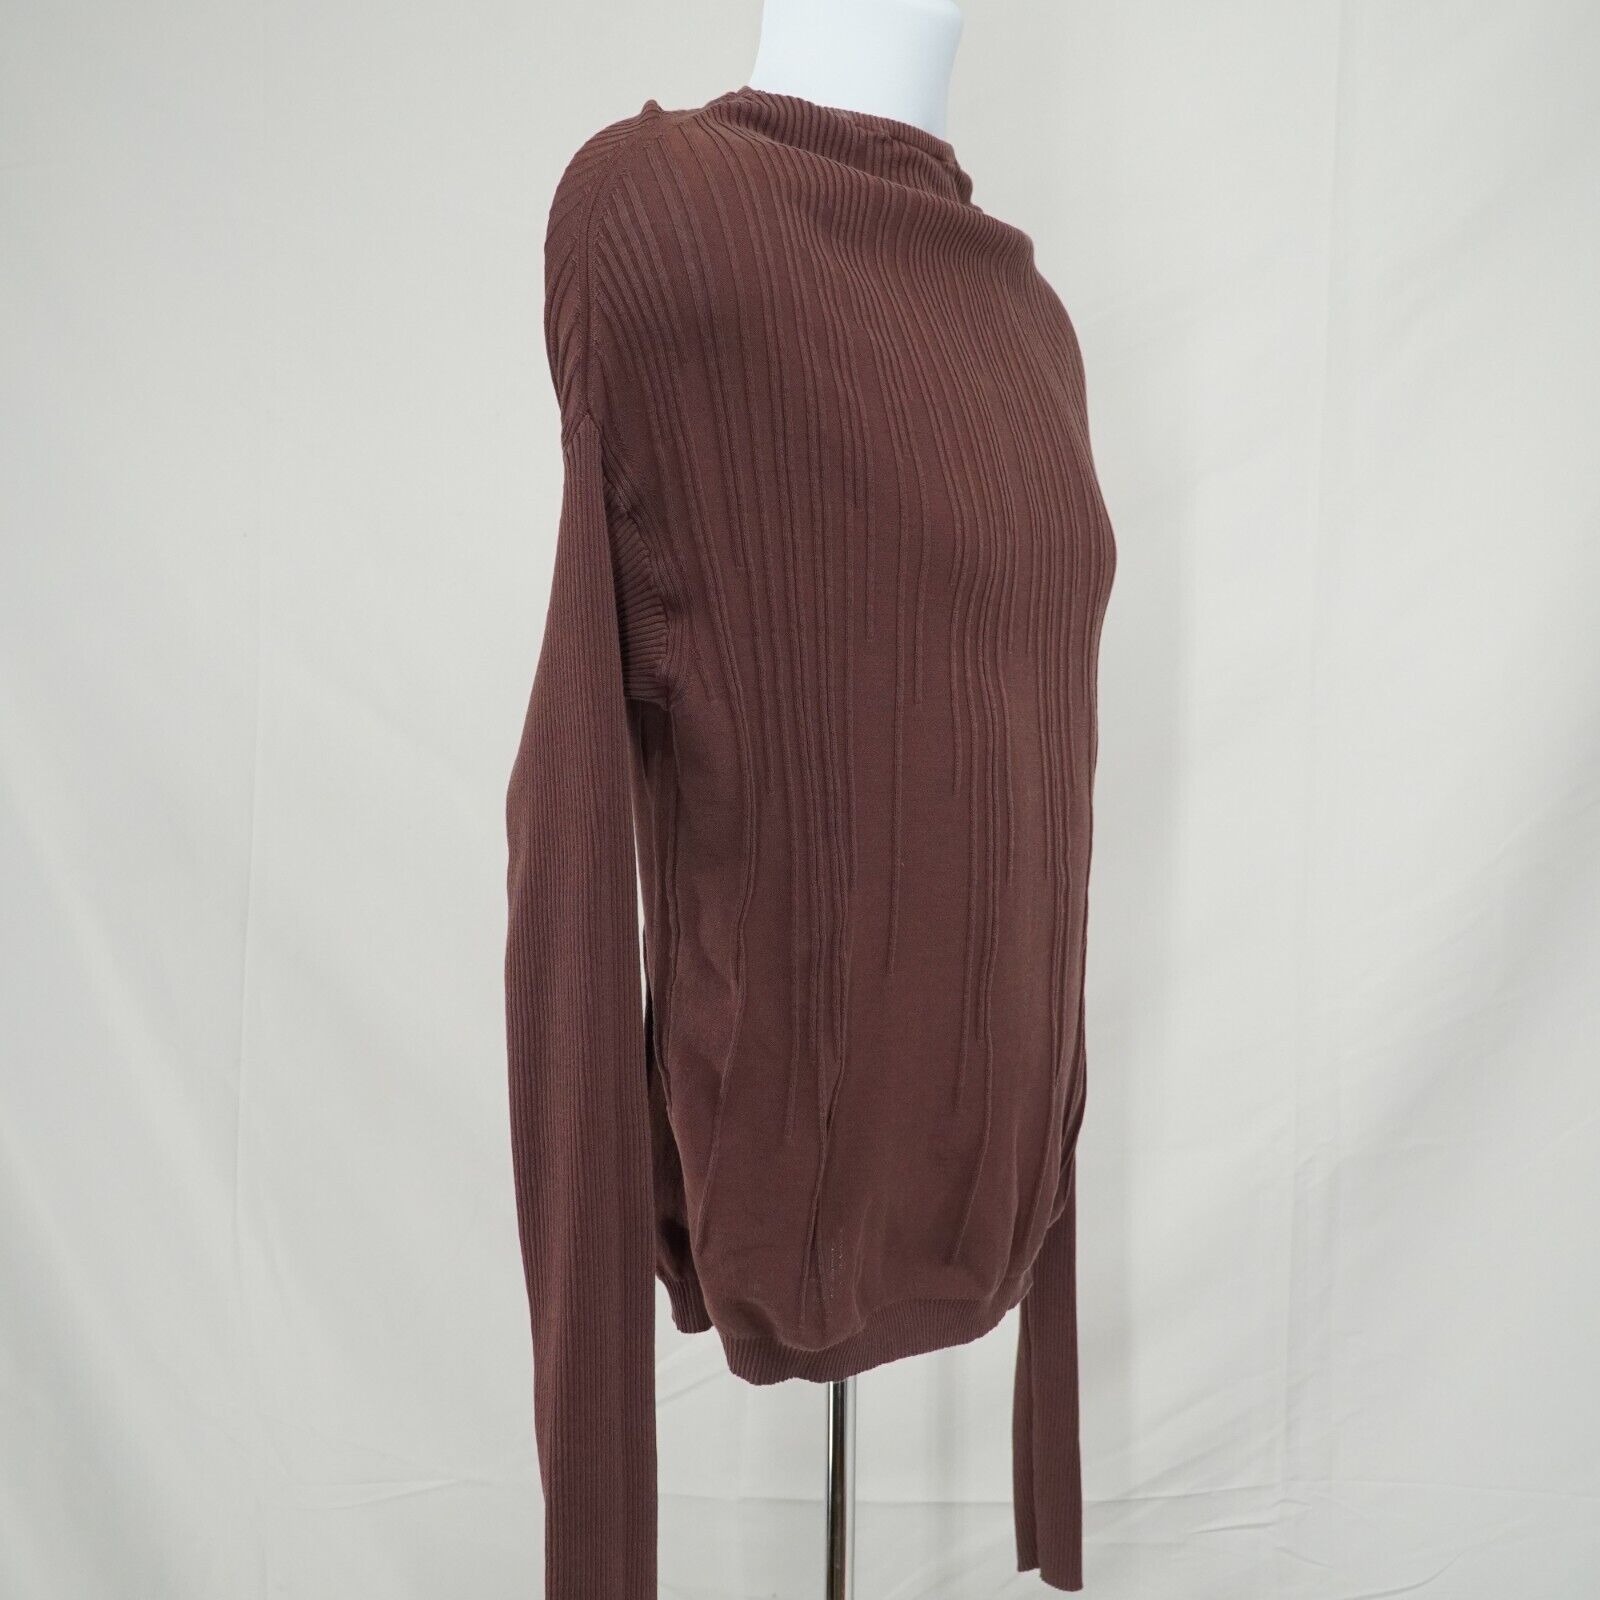 Ribbed Sweater SS17 Walrus Throat Burgundy Red - 15